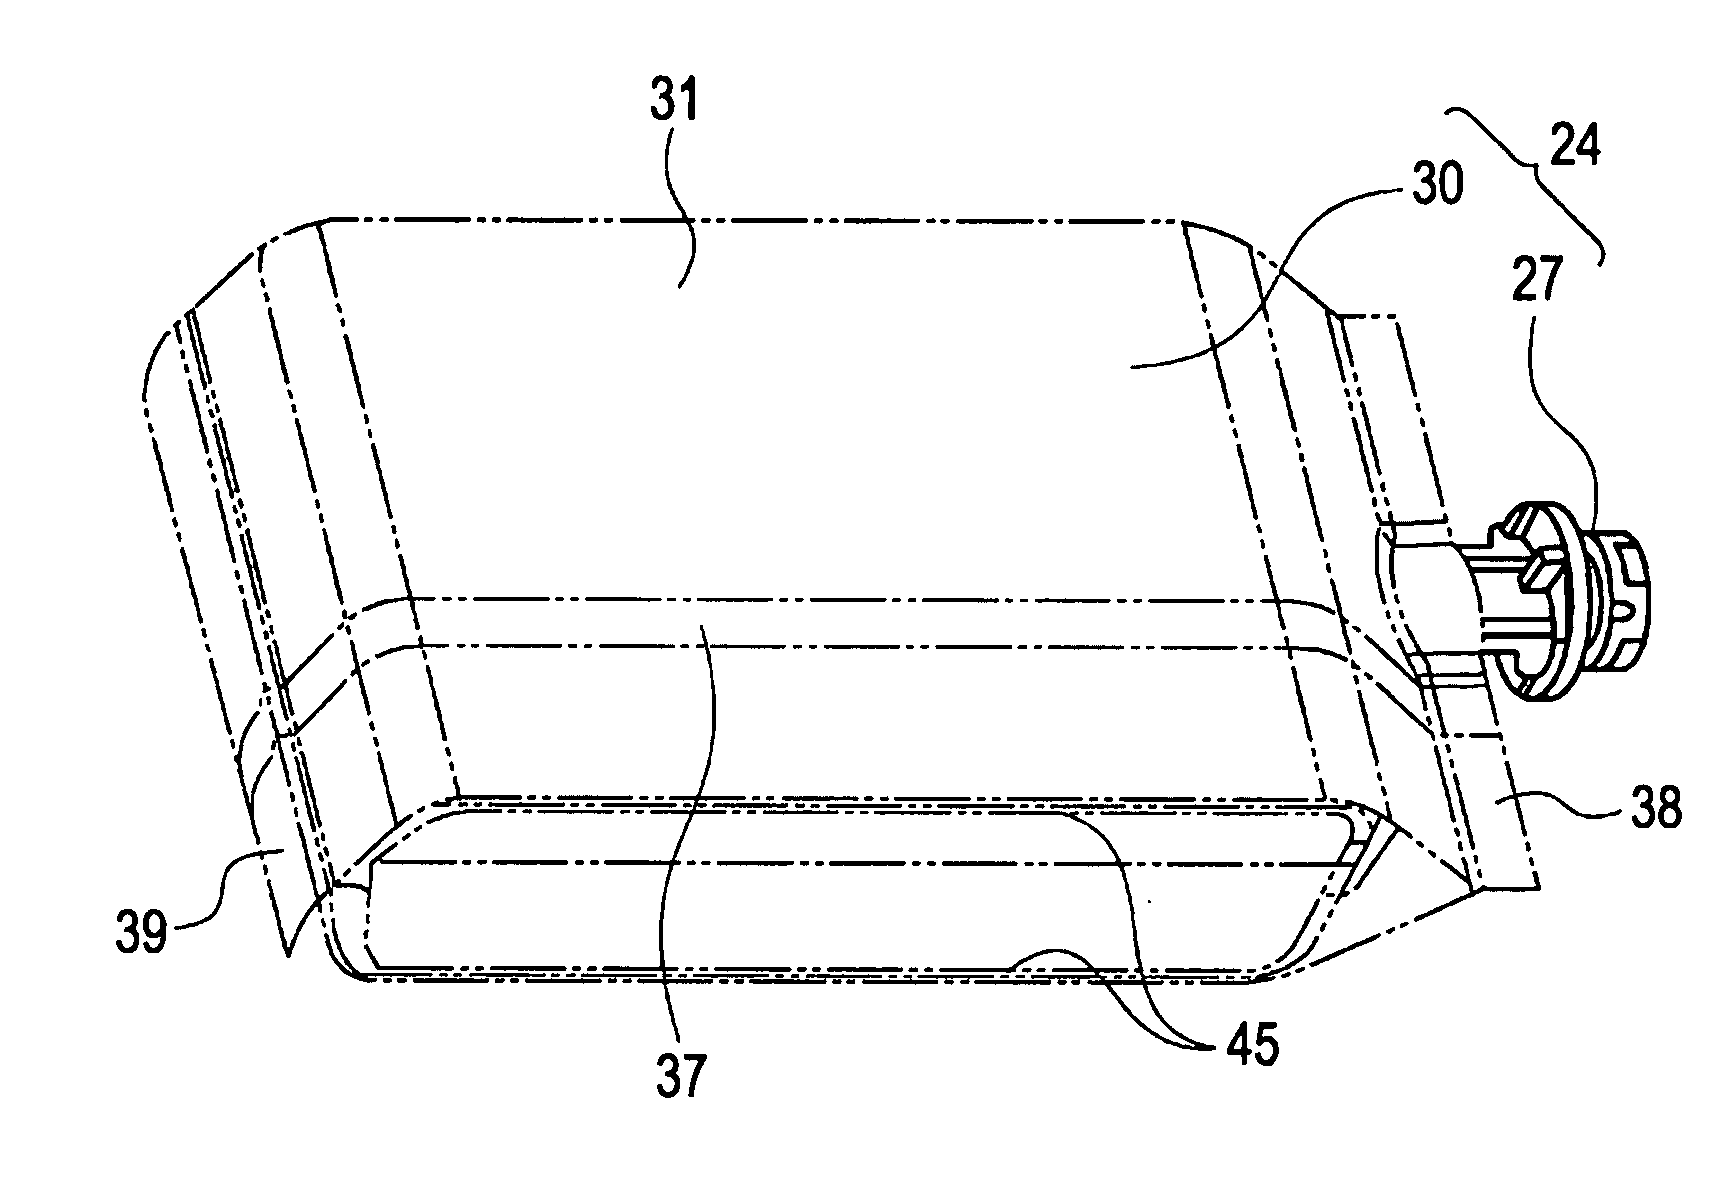 Liquid vessel and method of manufacturing the same